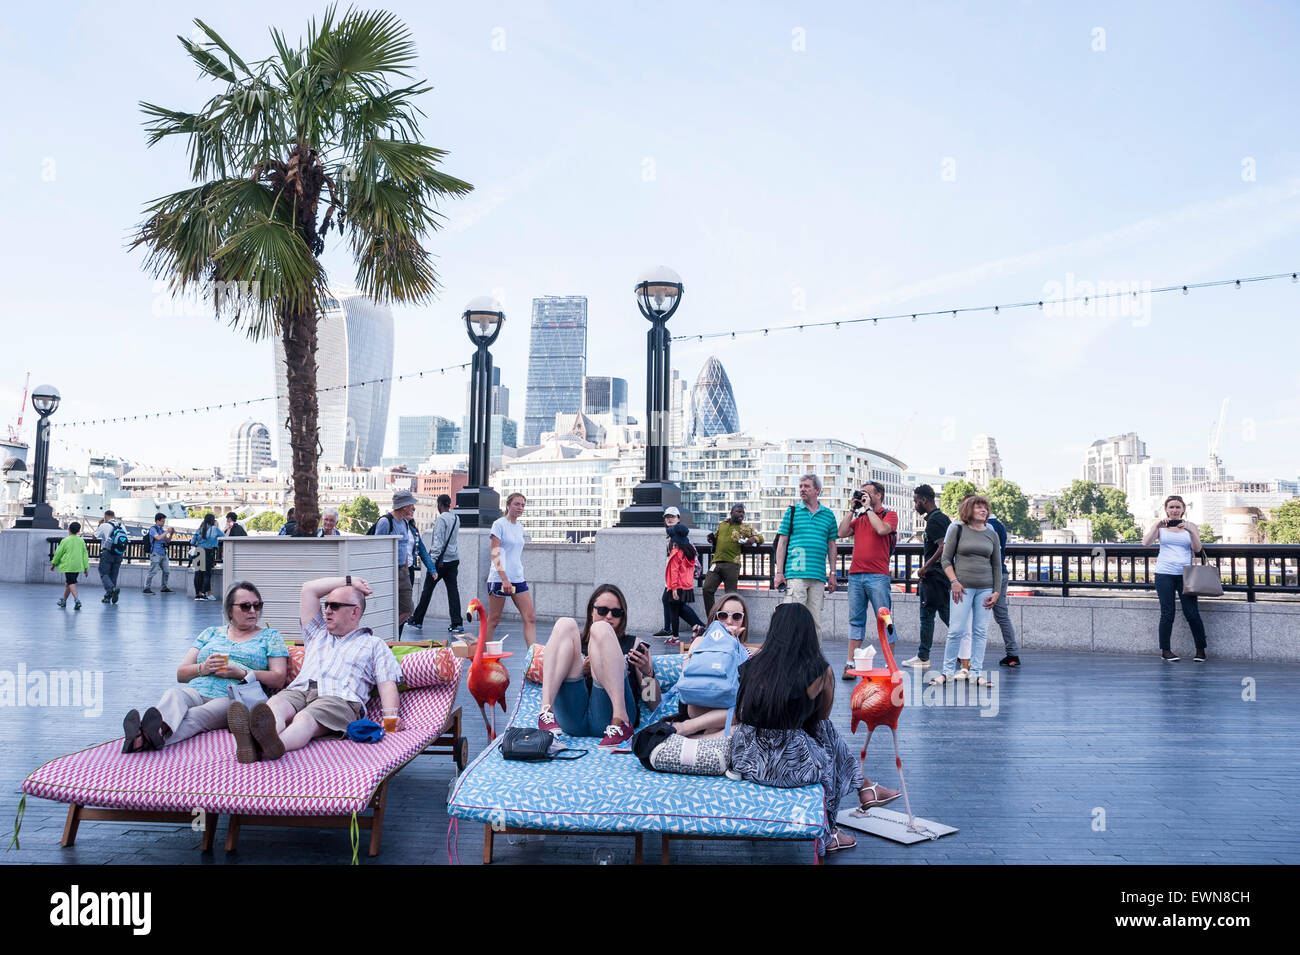 London, UK. 29 June 2015. The area outside City Hall resembles the French Riviera with palm trees, blue skies and warm temperatures. Credit:  Stephen Chung / Alamy Live News Stock Photo